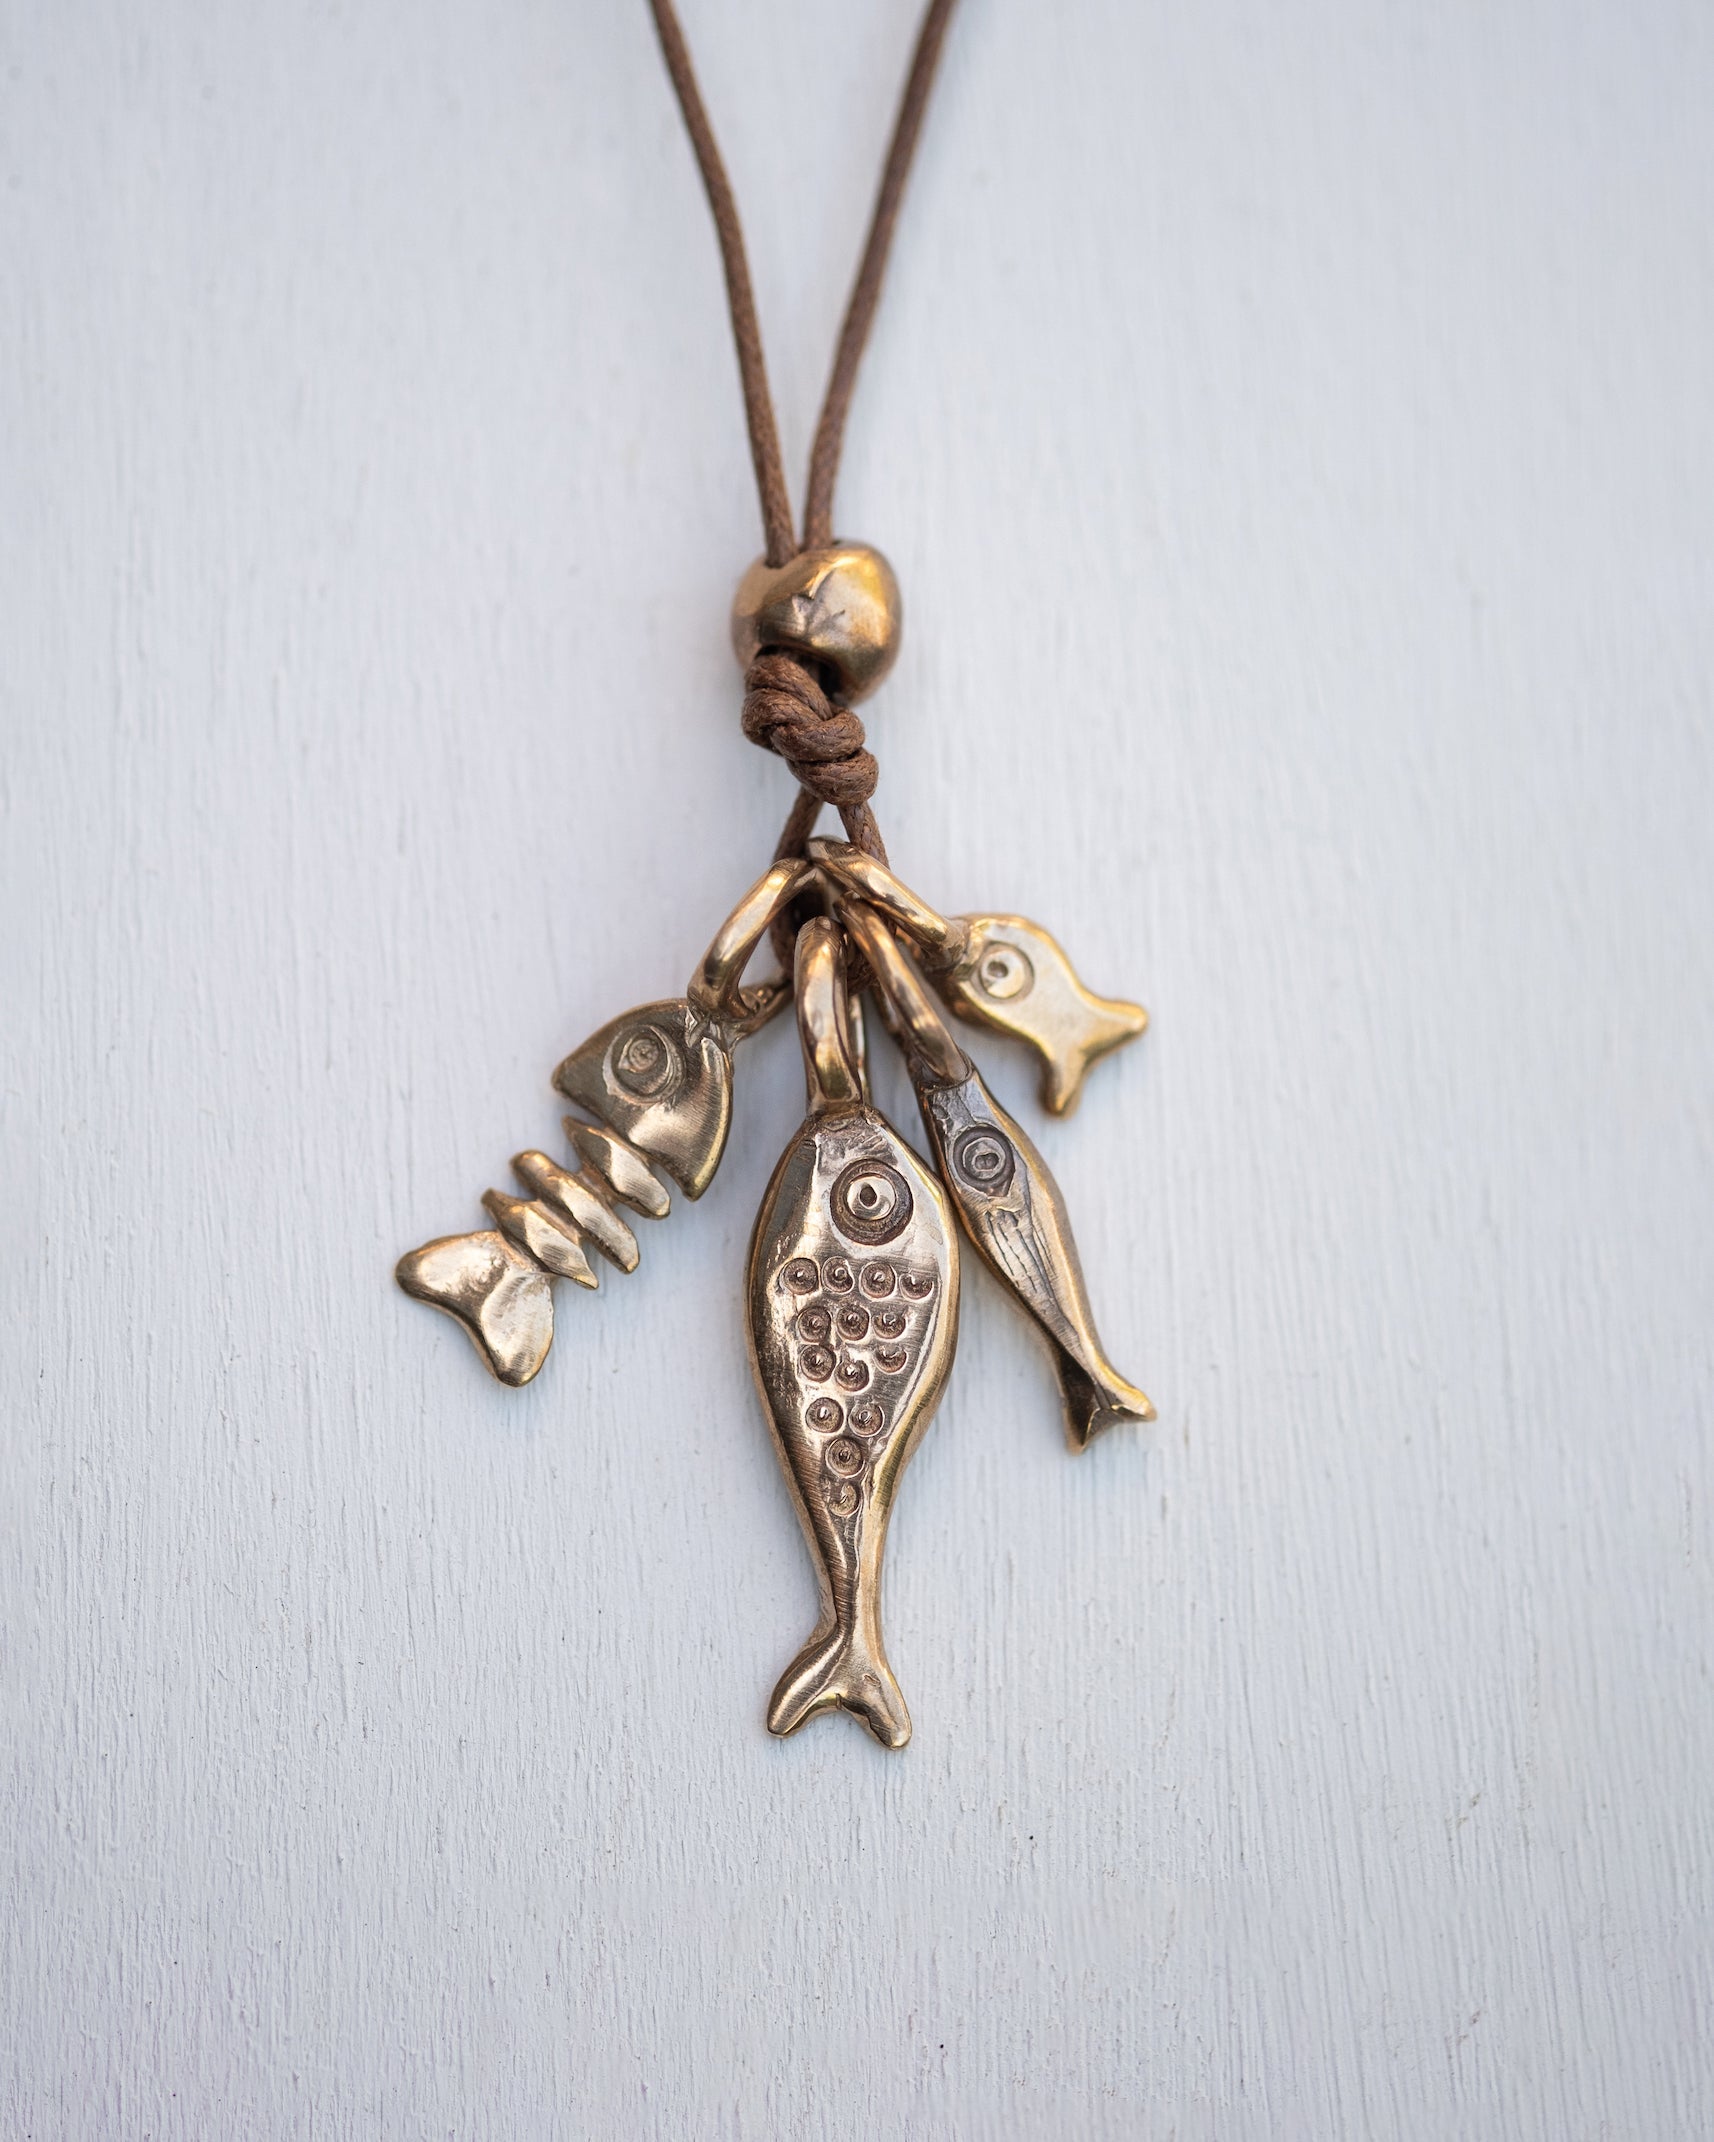 Catch of the Day Pendant